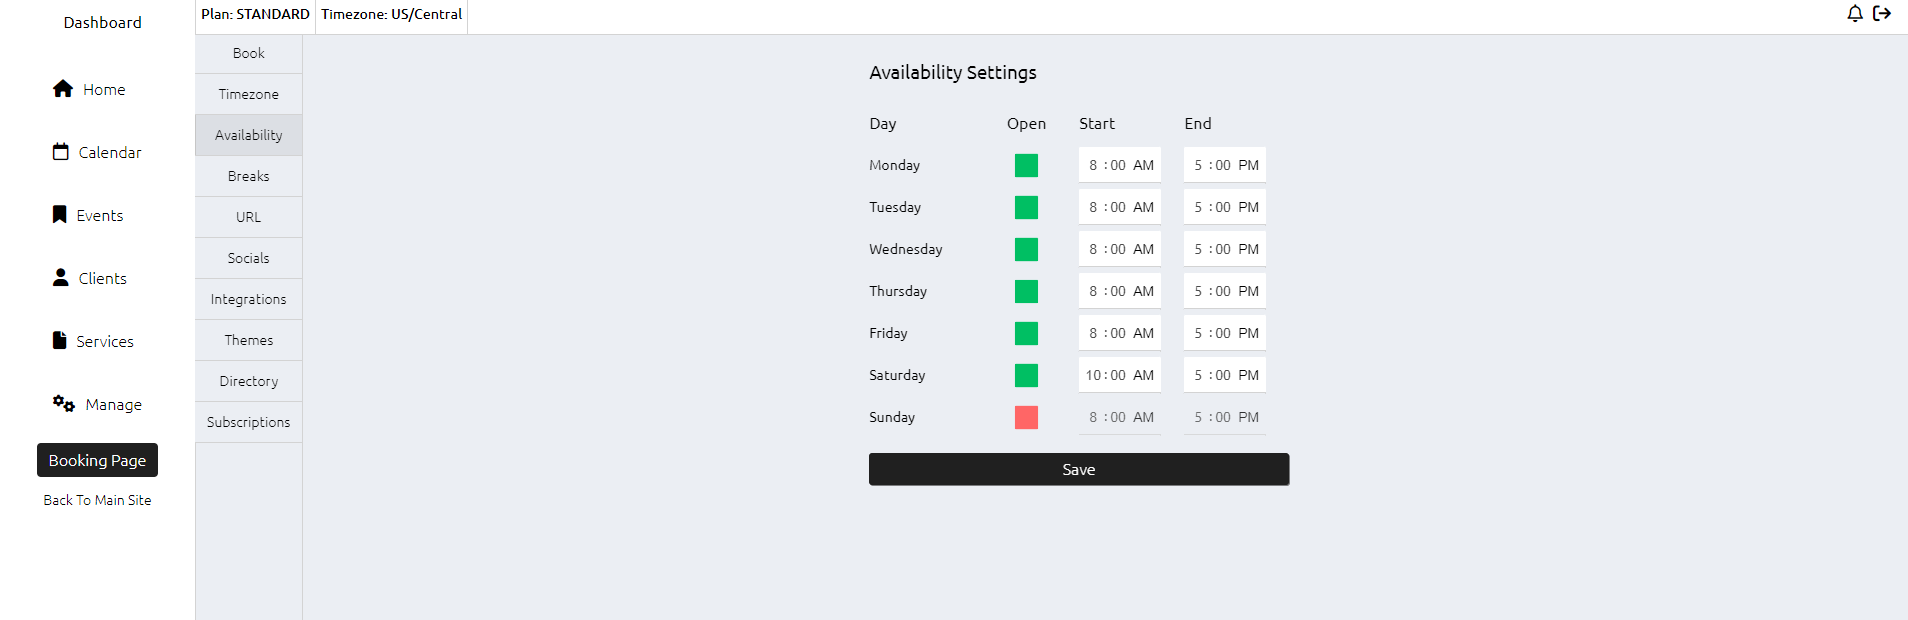 Omnibooking availability settings